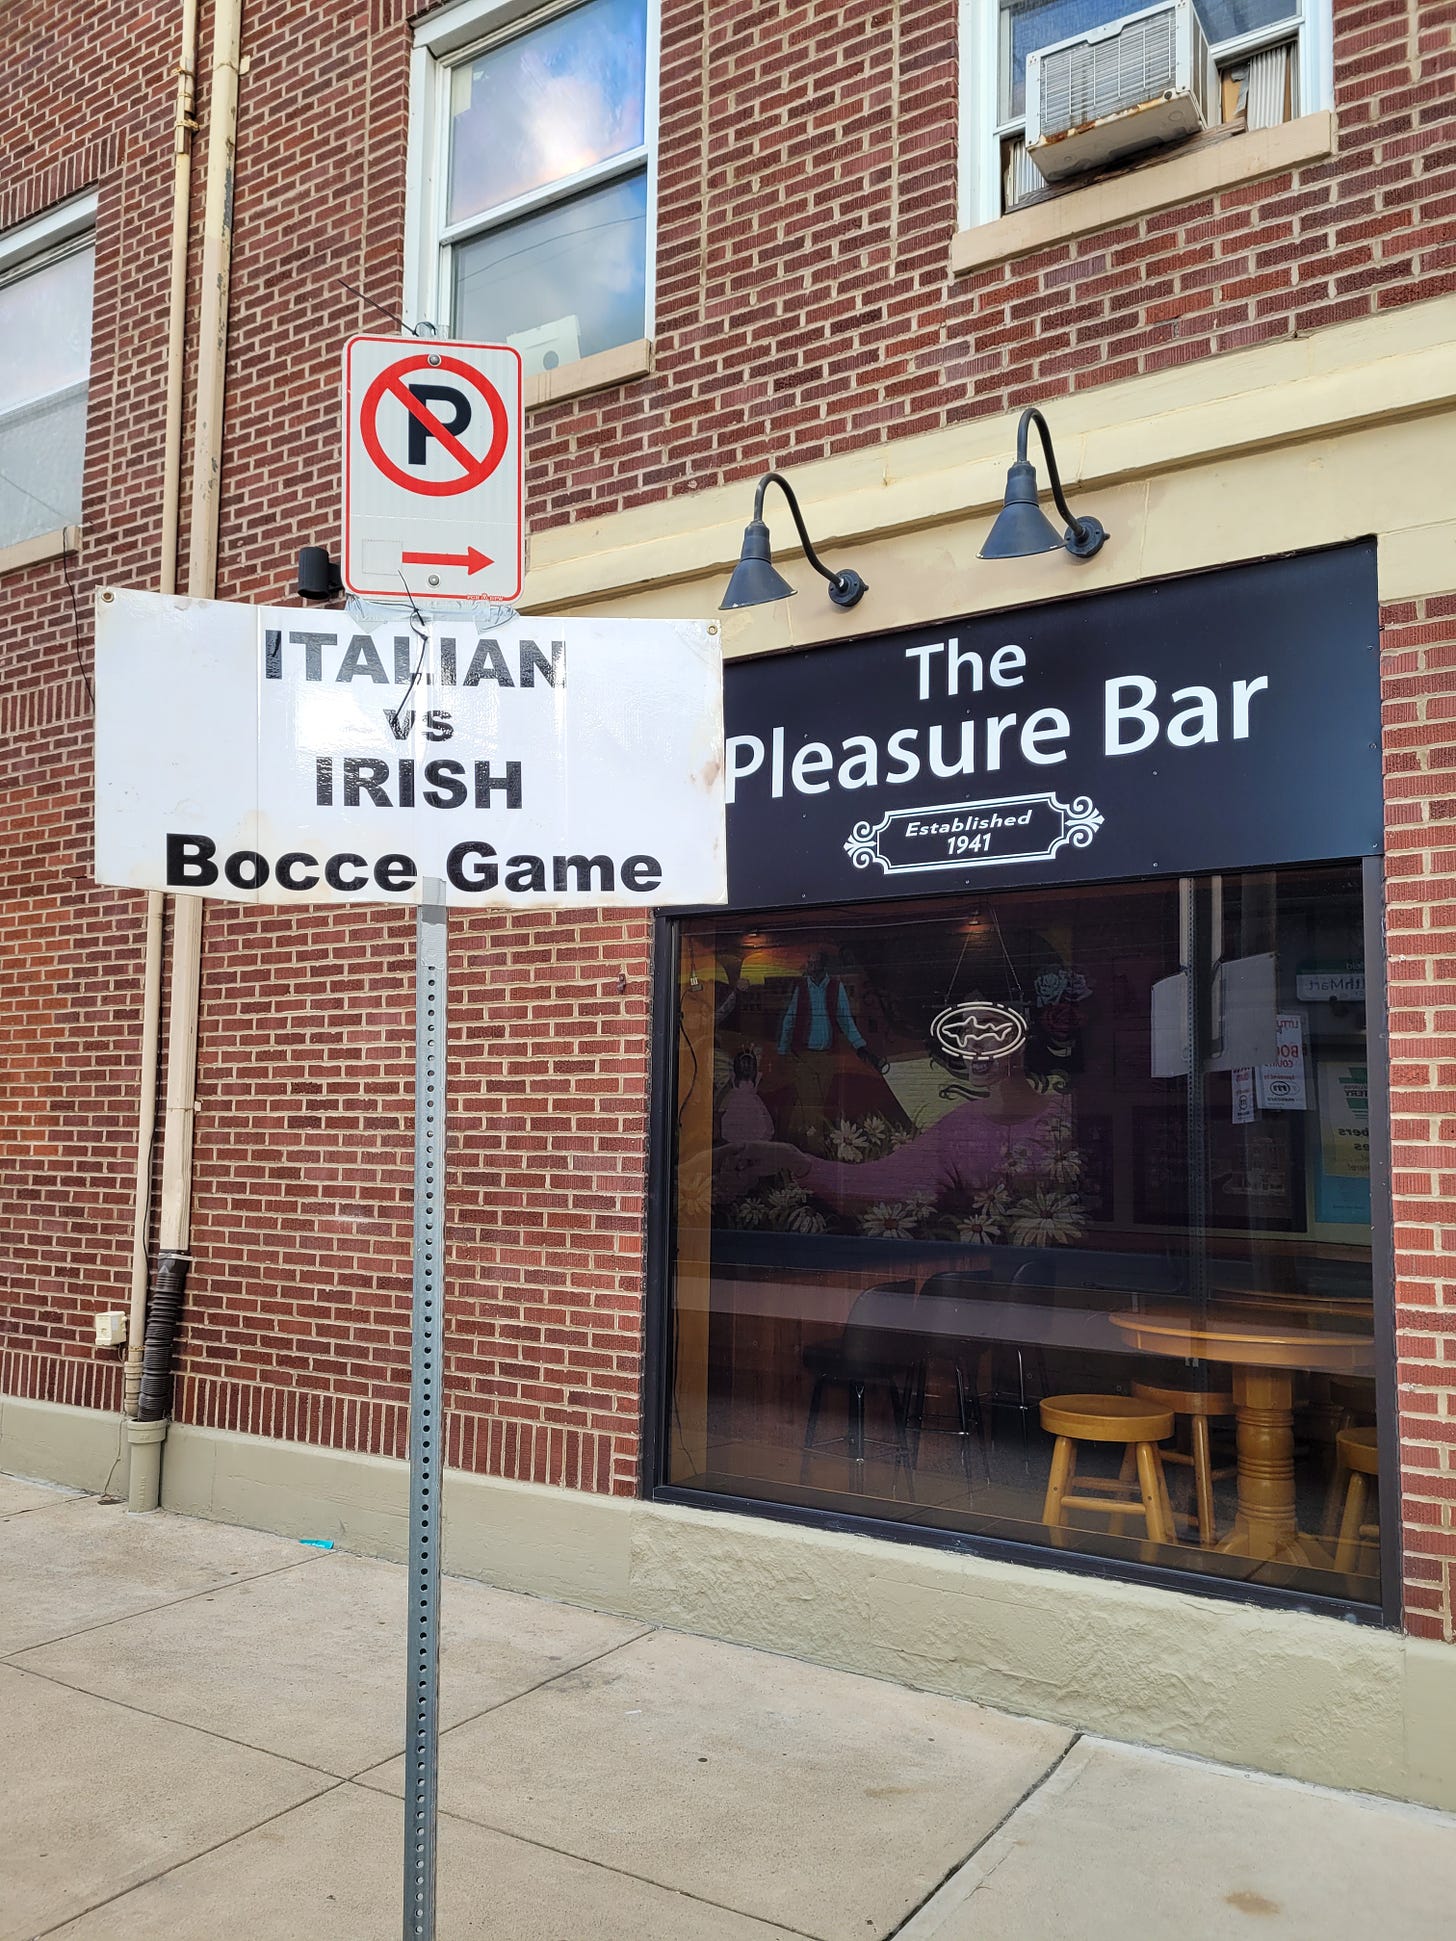 In the foreground: A sign reads "Italian vs Irish Bocce Game". In the background, a restaurant with a sign that reads "The Pleasure Bar"